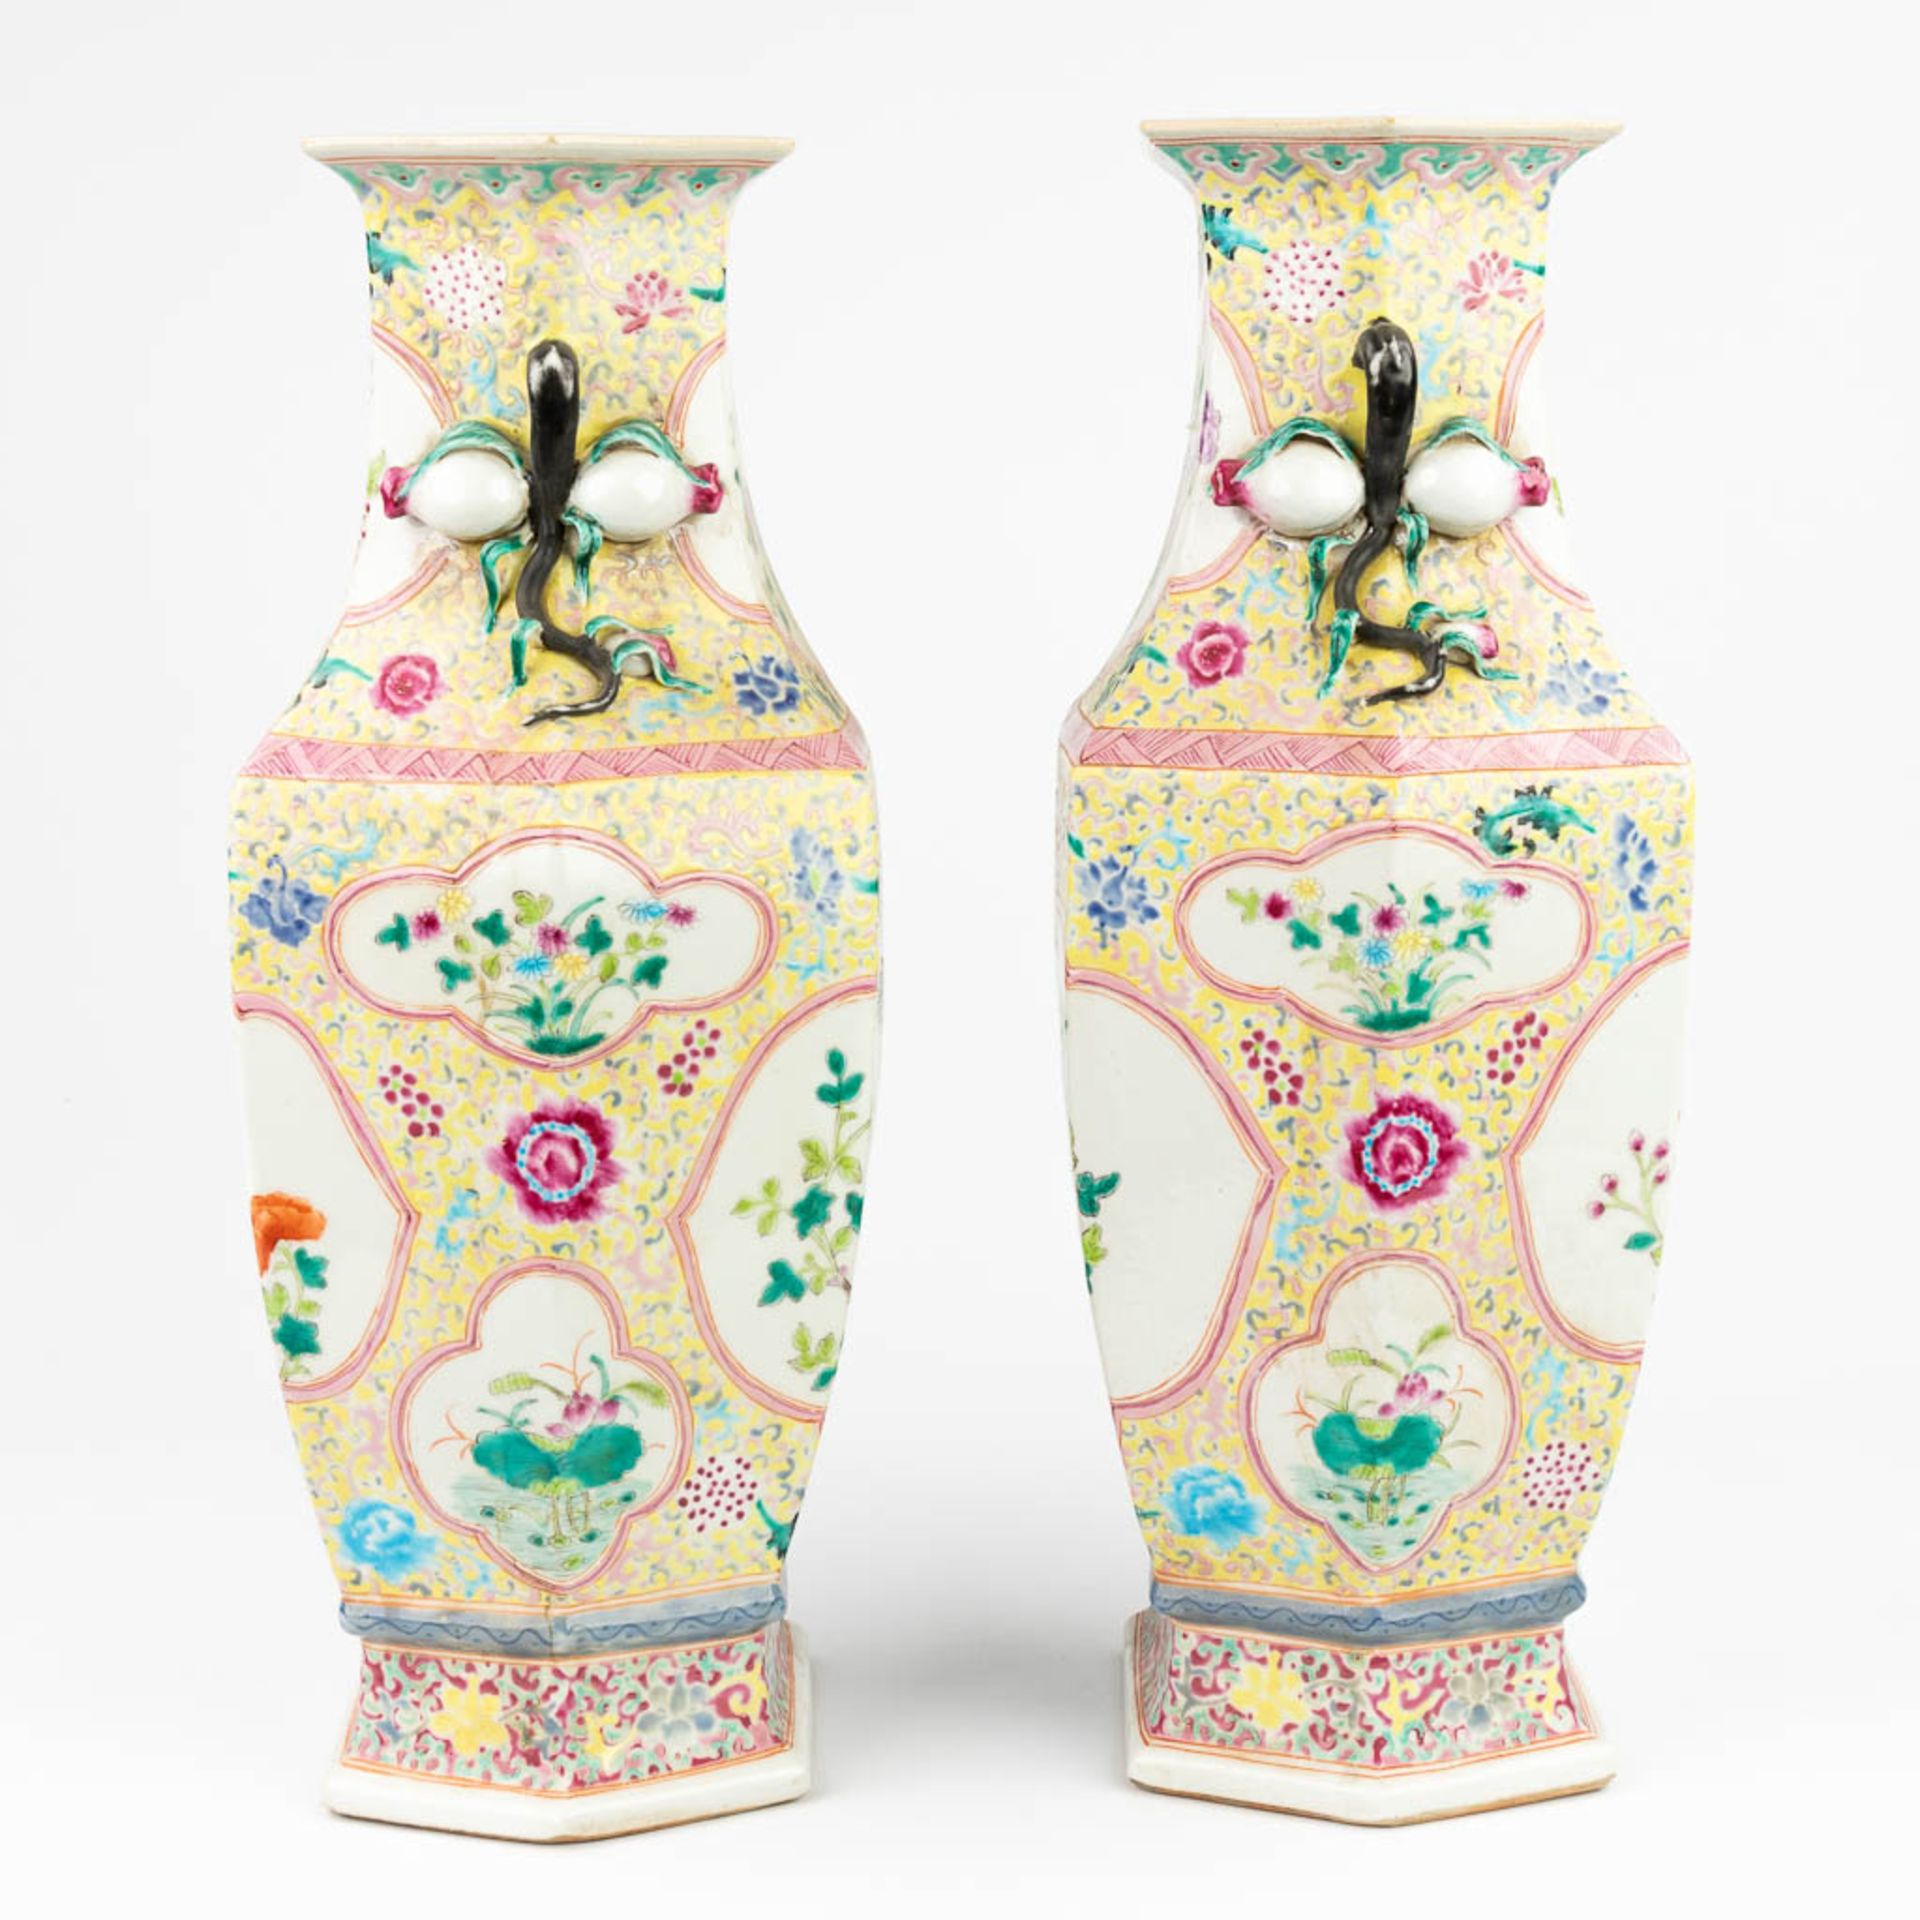 A pair of hexagonal Chinese vases made of porcelain (18 x 22 x 46 cm) - Image 9 of 17